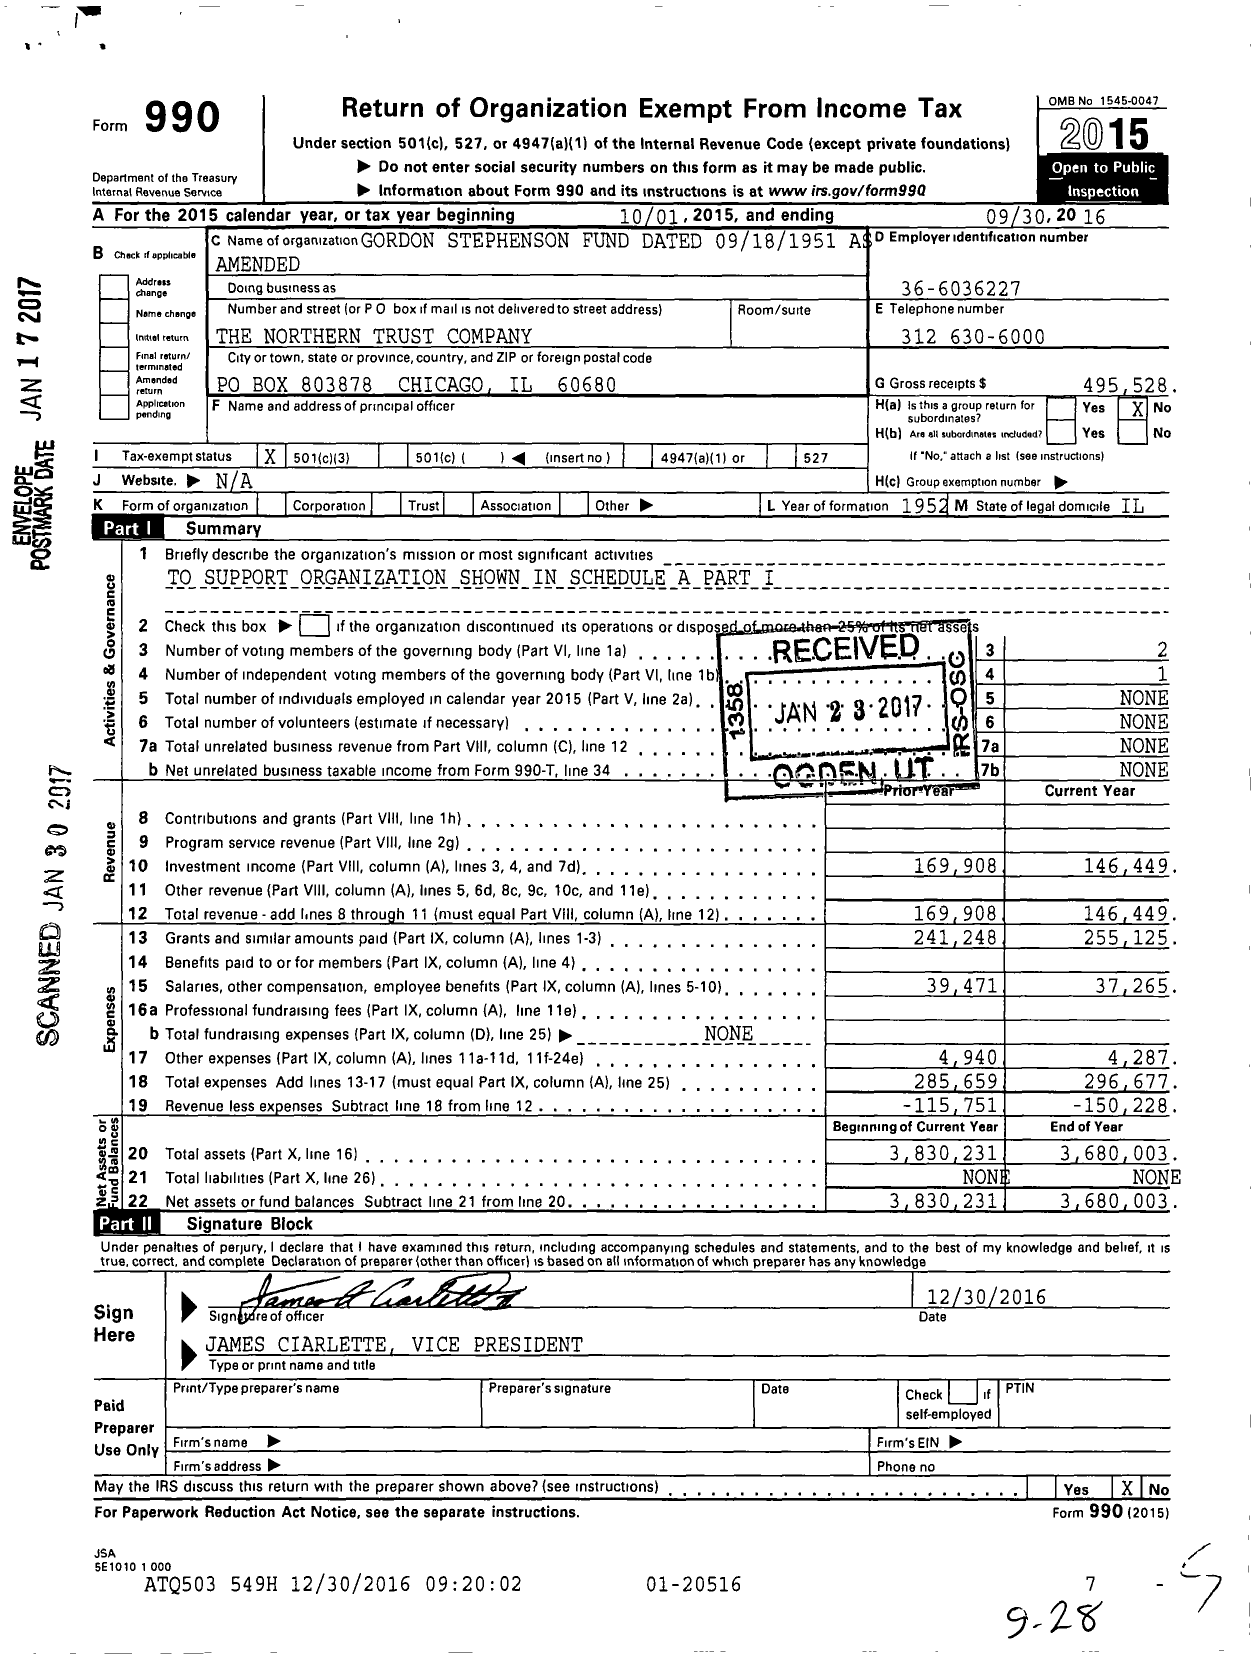 Image of first page of 2015 Form 990 for Gordon Stephenson Fund Dated 09181951